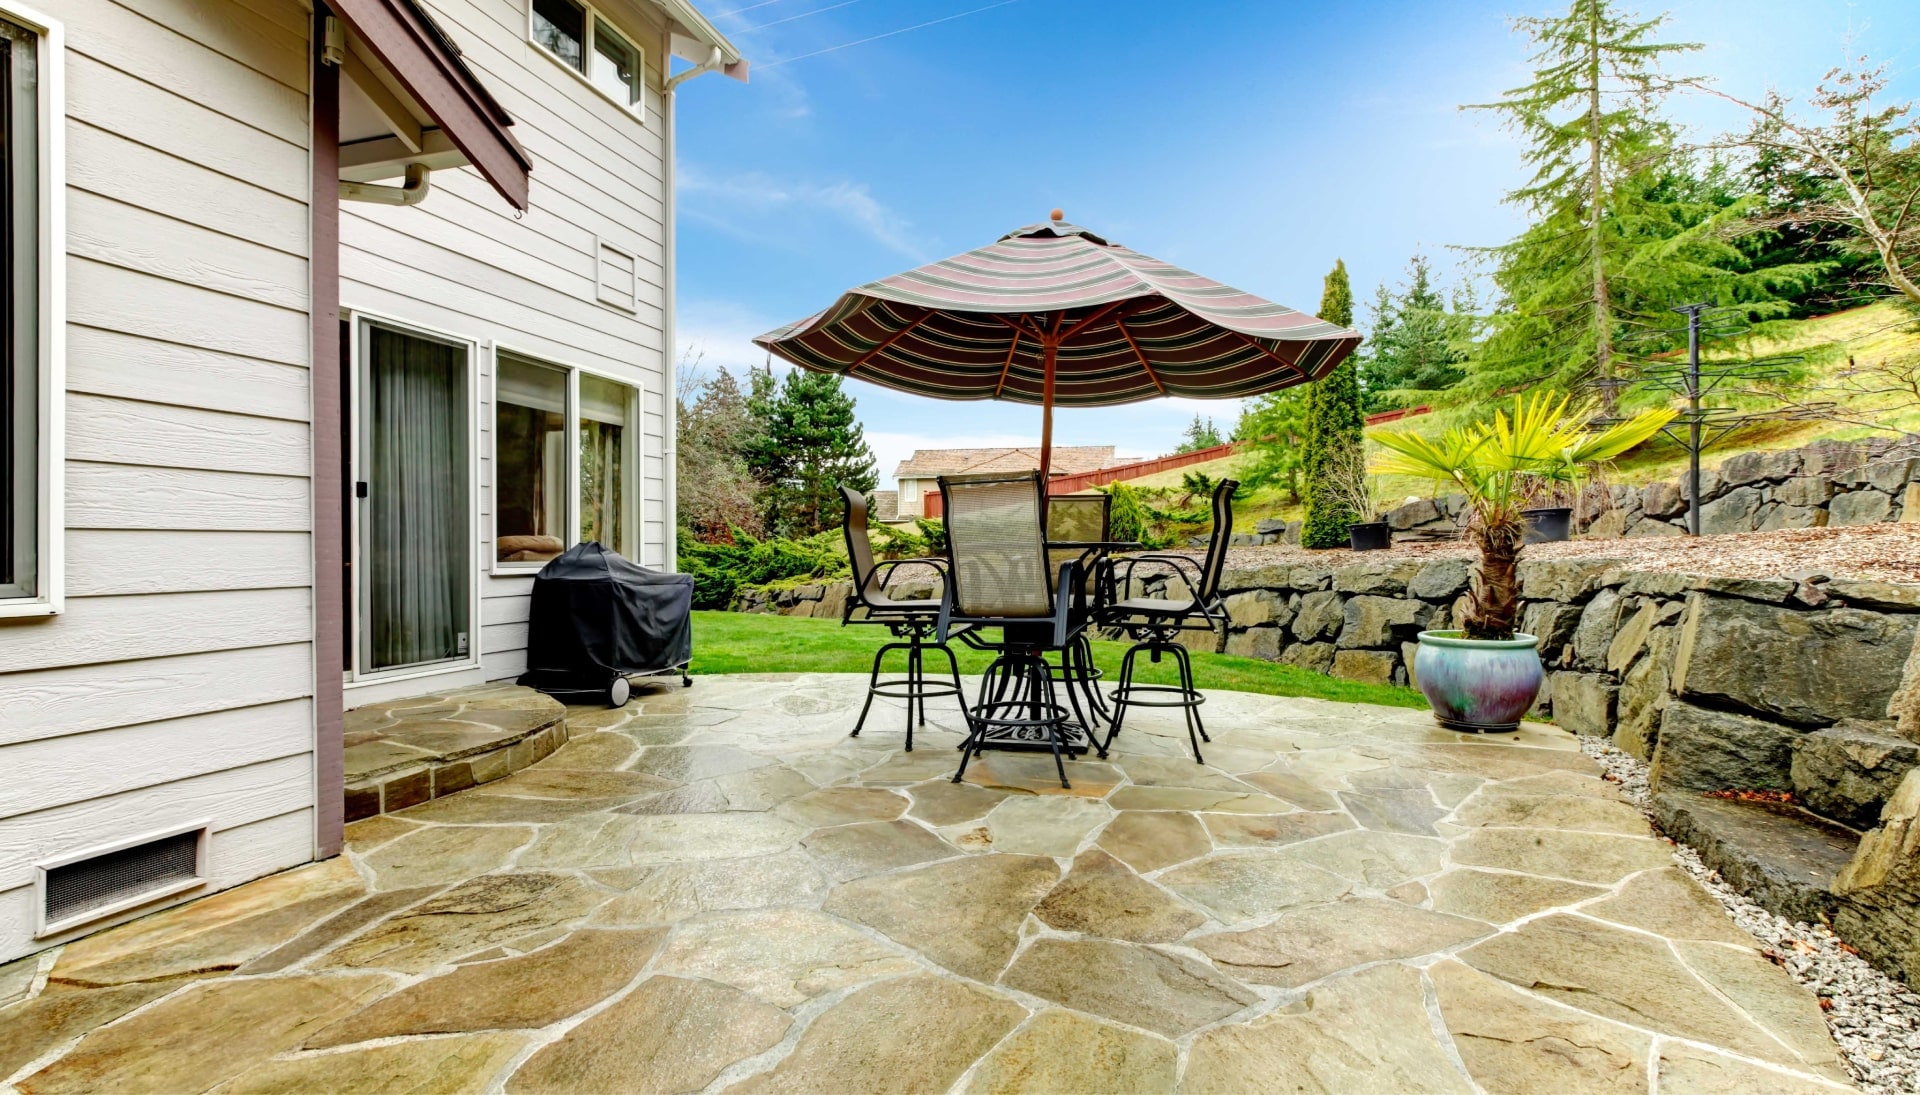 Beautifully Textured and Patterned Concrete Patios in Casper, WY